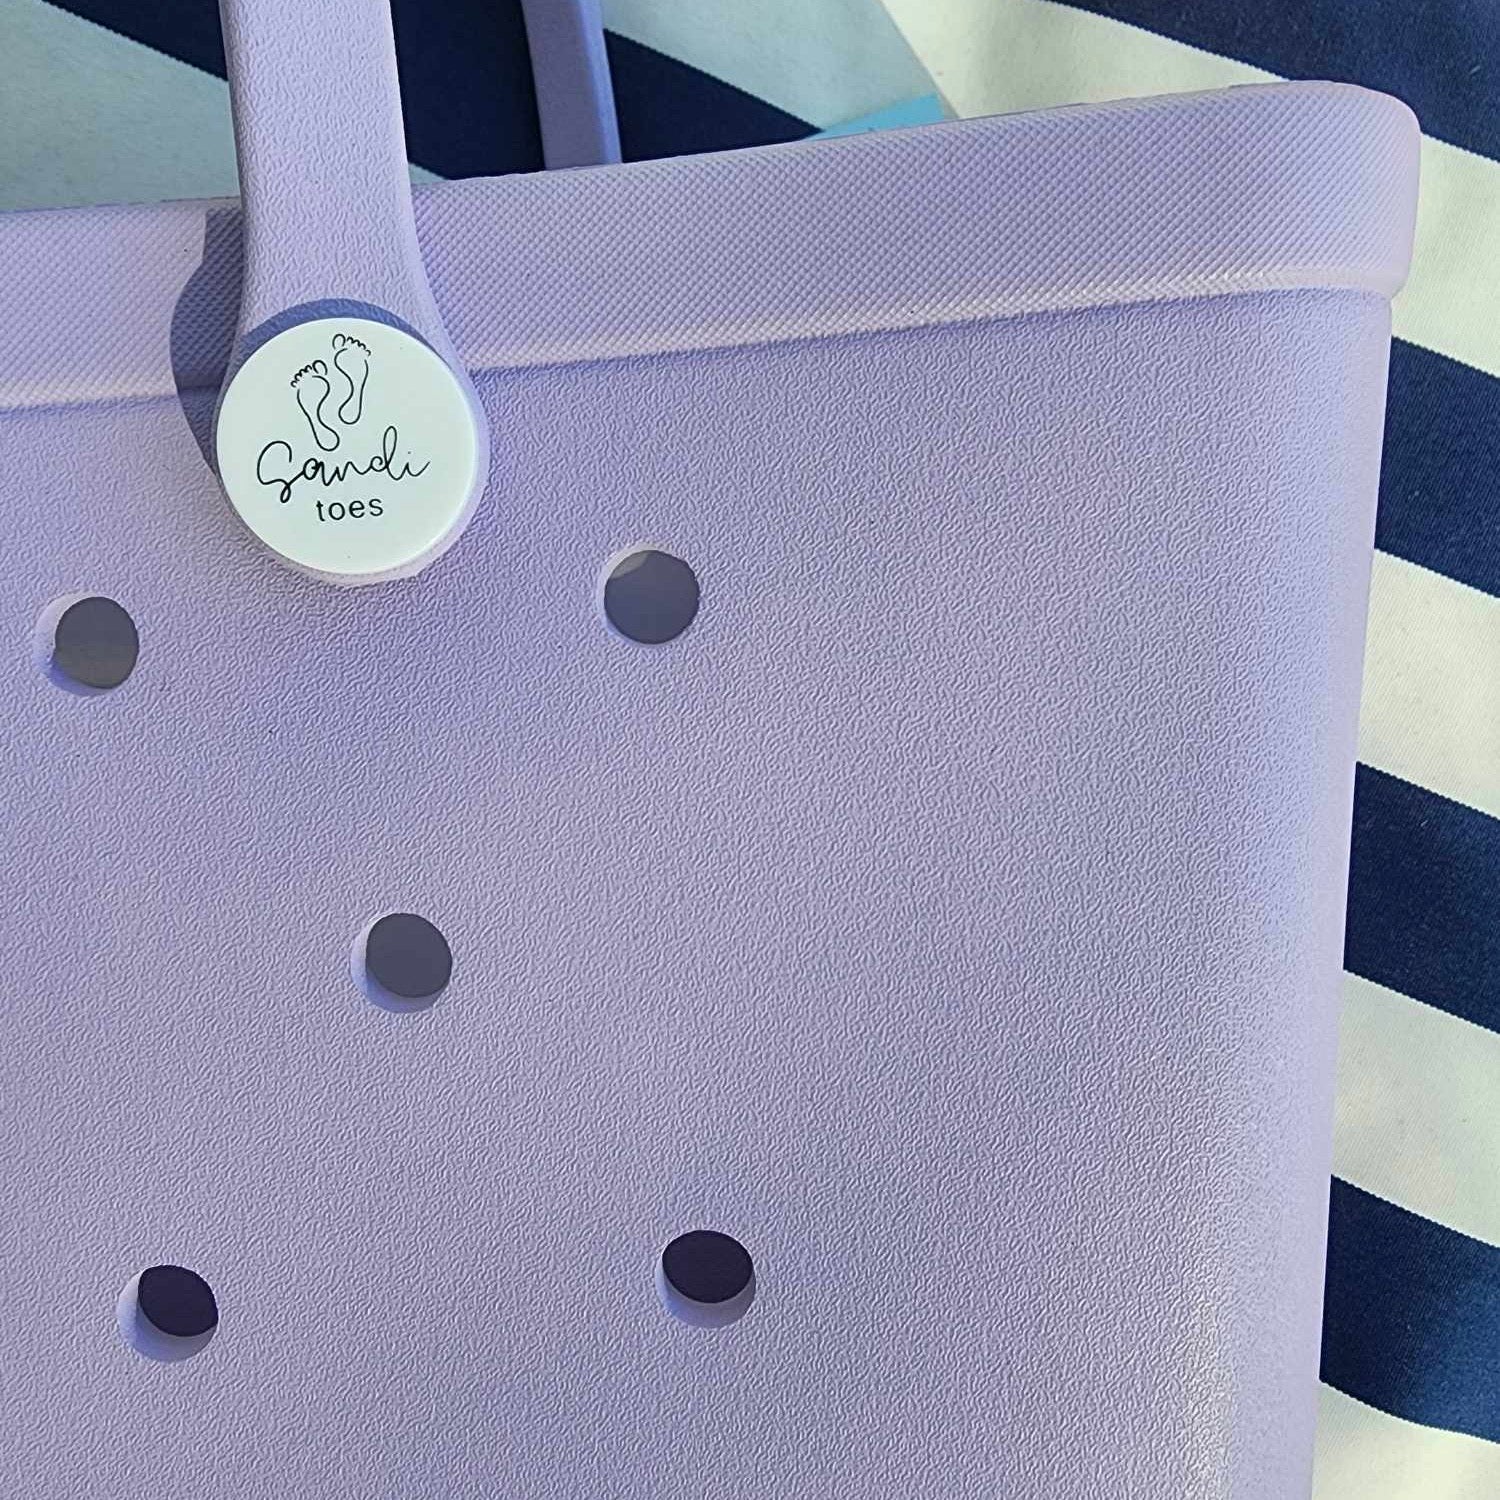 Coral Cove Silicone Bag with Sandi Toes Logo: Everyday Essentials in Style. [Durable coral cove purple silicone bag displays the Sandi Toes logo, ideal for carrying your essentials with a touch of beach flair.]